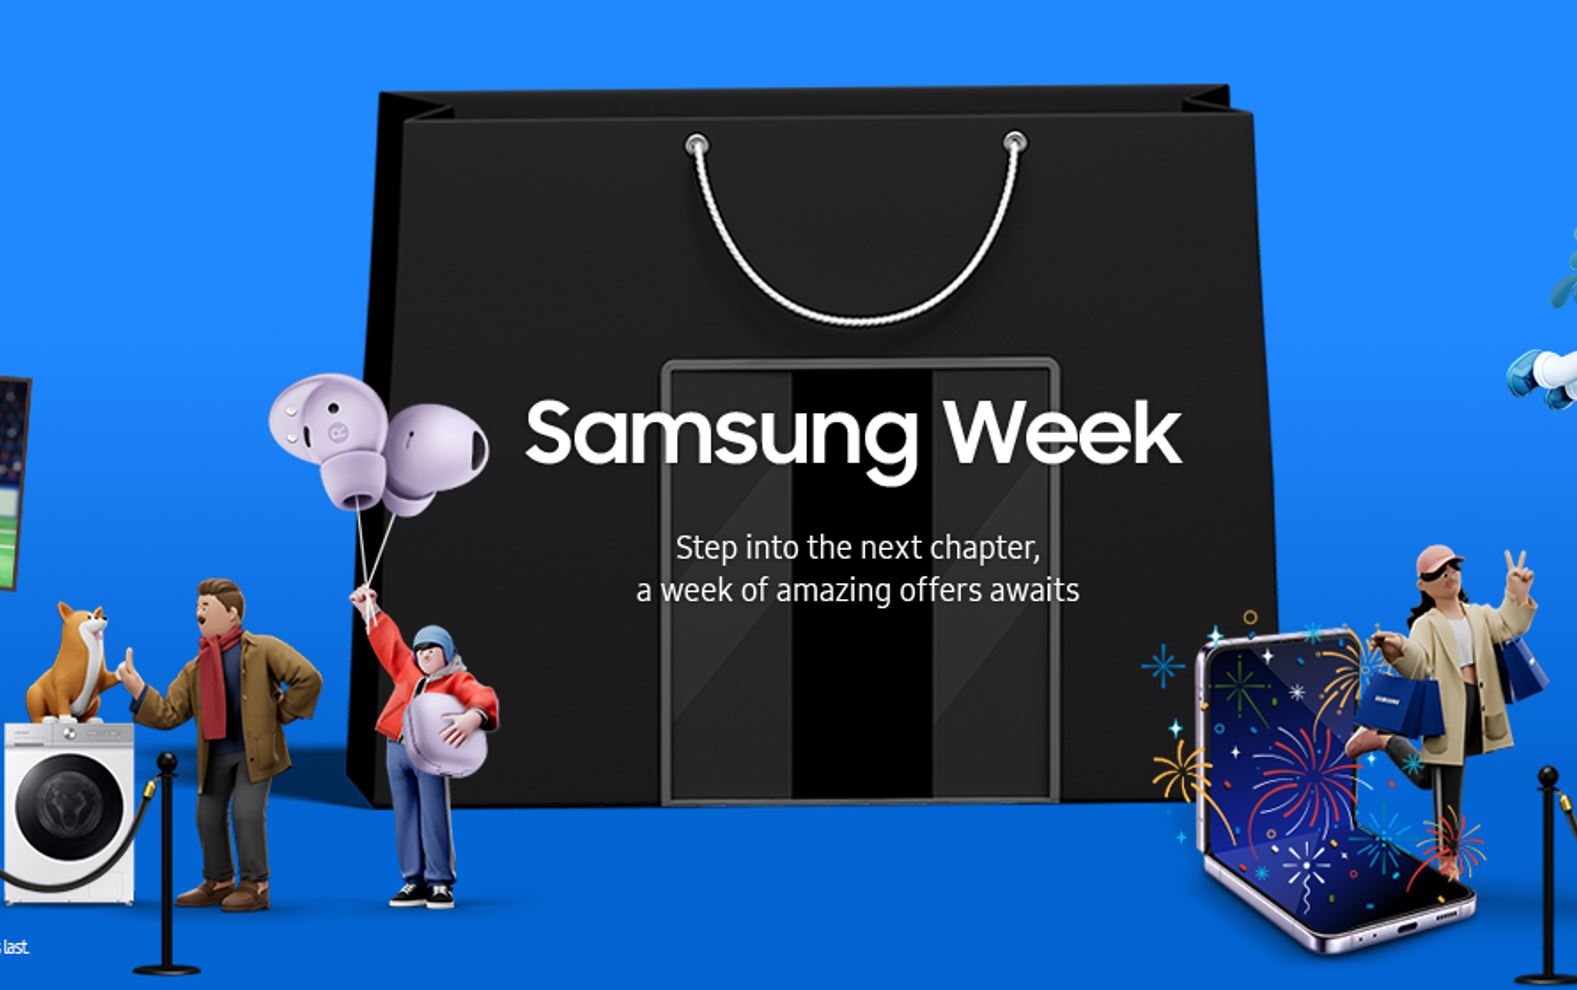 Samsung Week is back with amazing bargains and promotions to celebrate